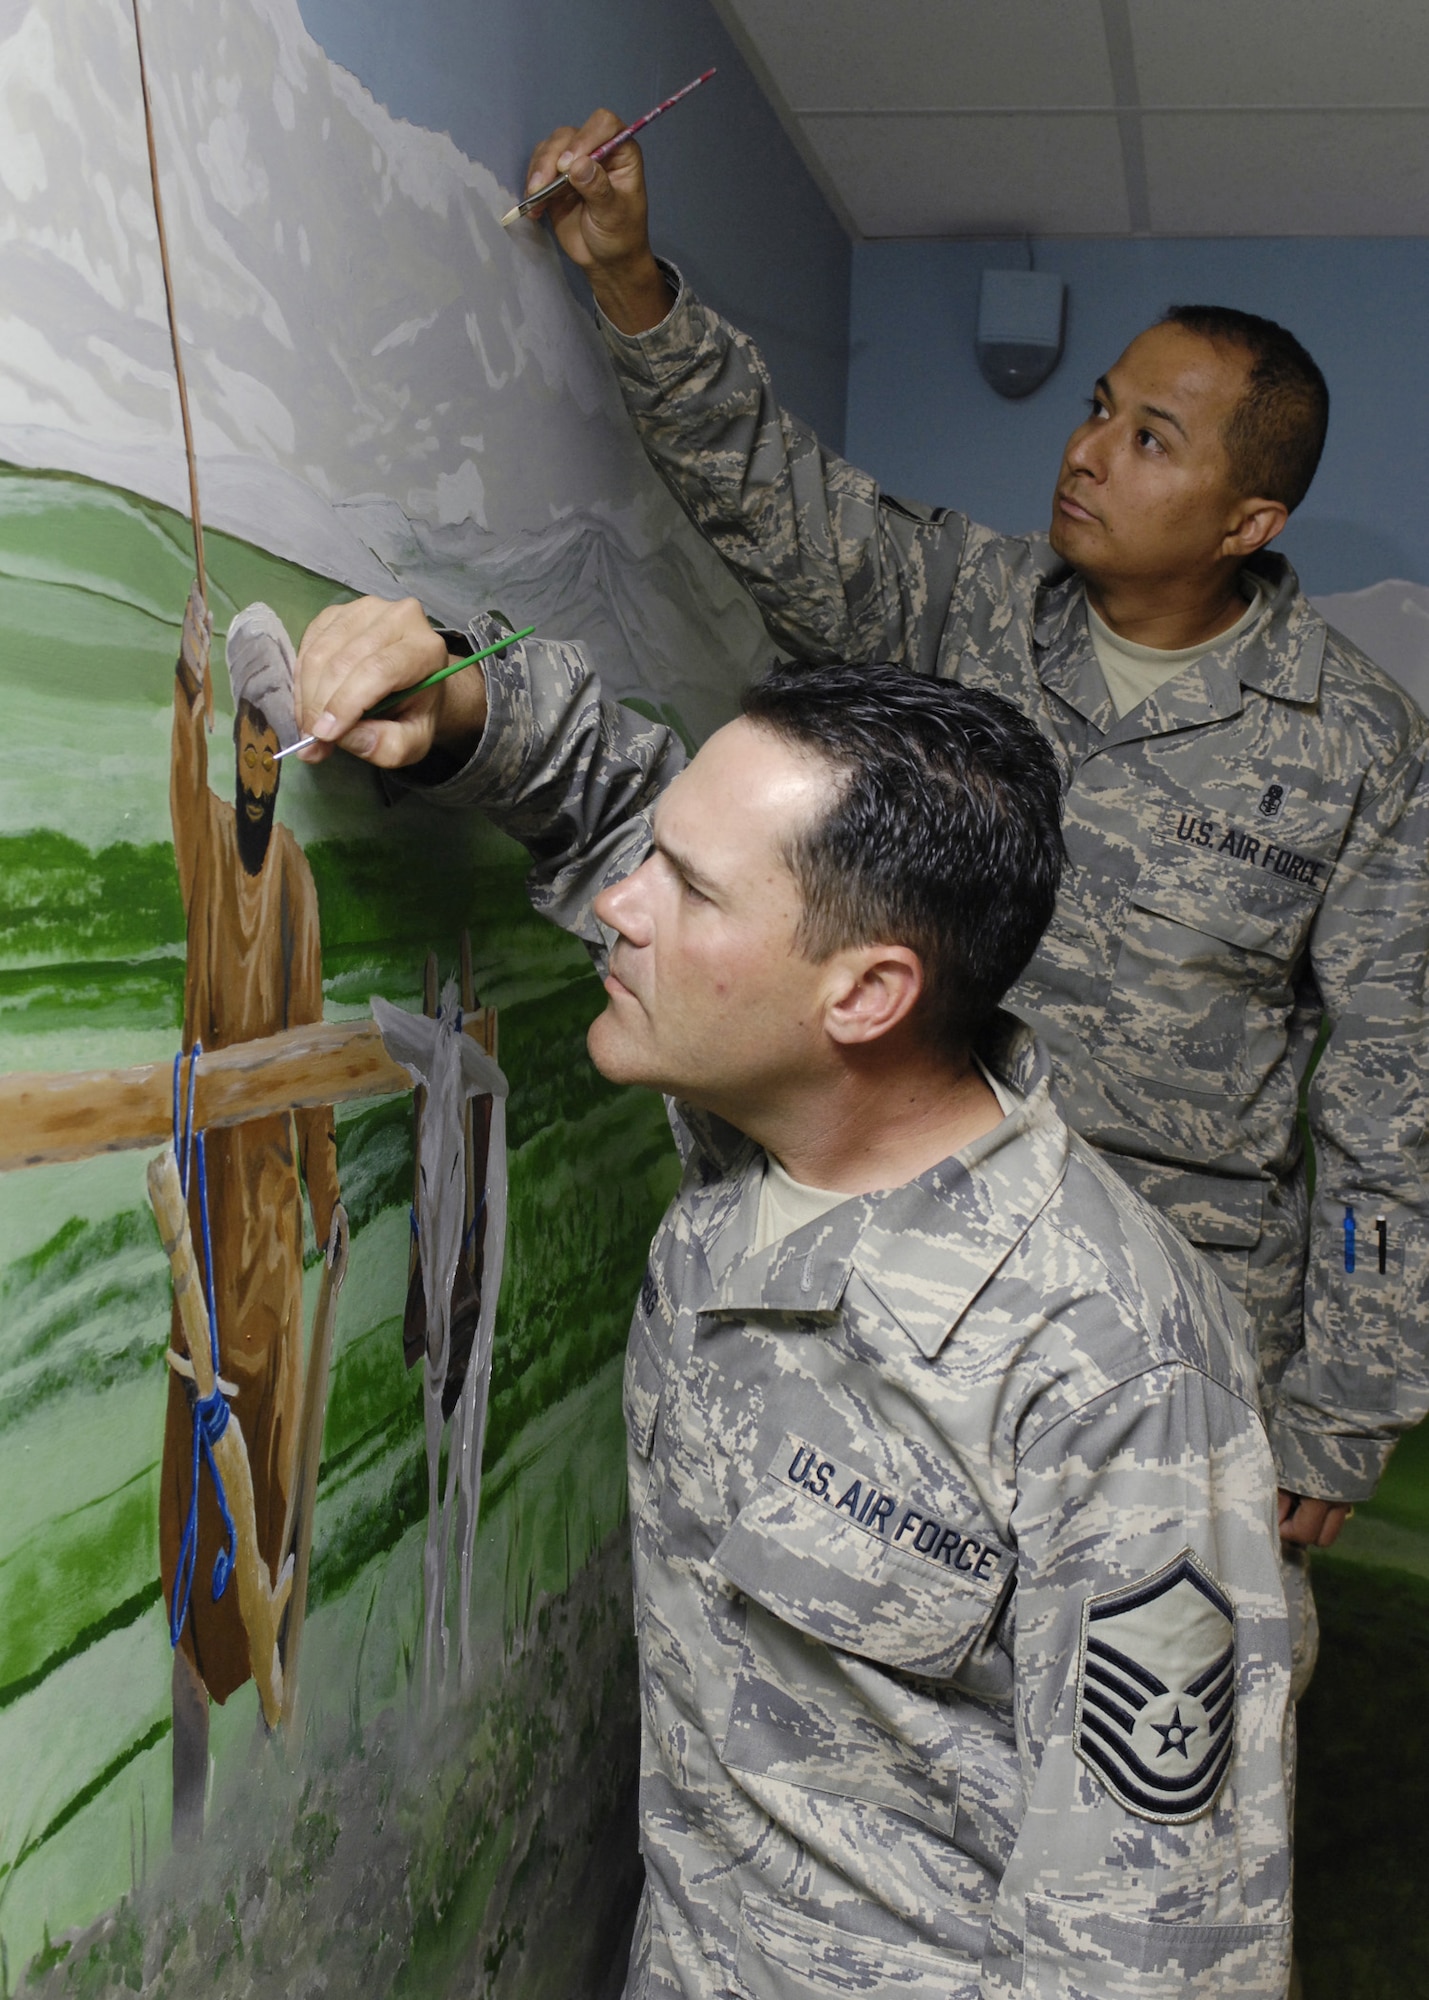 BAGRAM AIR FIELD, Afghanistan - Master Sgt. Albert Greig (front), Craig Joint Theater Hospital medical logistics superintendent, and Master Sgt. Cruz Torres Jr., NCO-in-charge Emergency Room, perform some final touch ups on a mural they and other artists painted in the hospital conference room here April 24. The mural features local culture and a panoramic view of the mountains from Bagram. Sergeant Greig is deployed from the 1st Special Operations Support Squadron, Hurlburt Field, Fla., and Sergeant Torres is deployed from the 710th Medical Squadron, Offut Air Force Base, Neb. (U.S. Air Force photo by Master Sgt. Demetrius Lester)